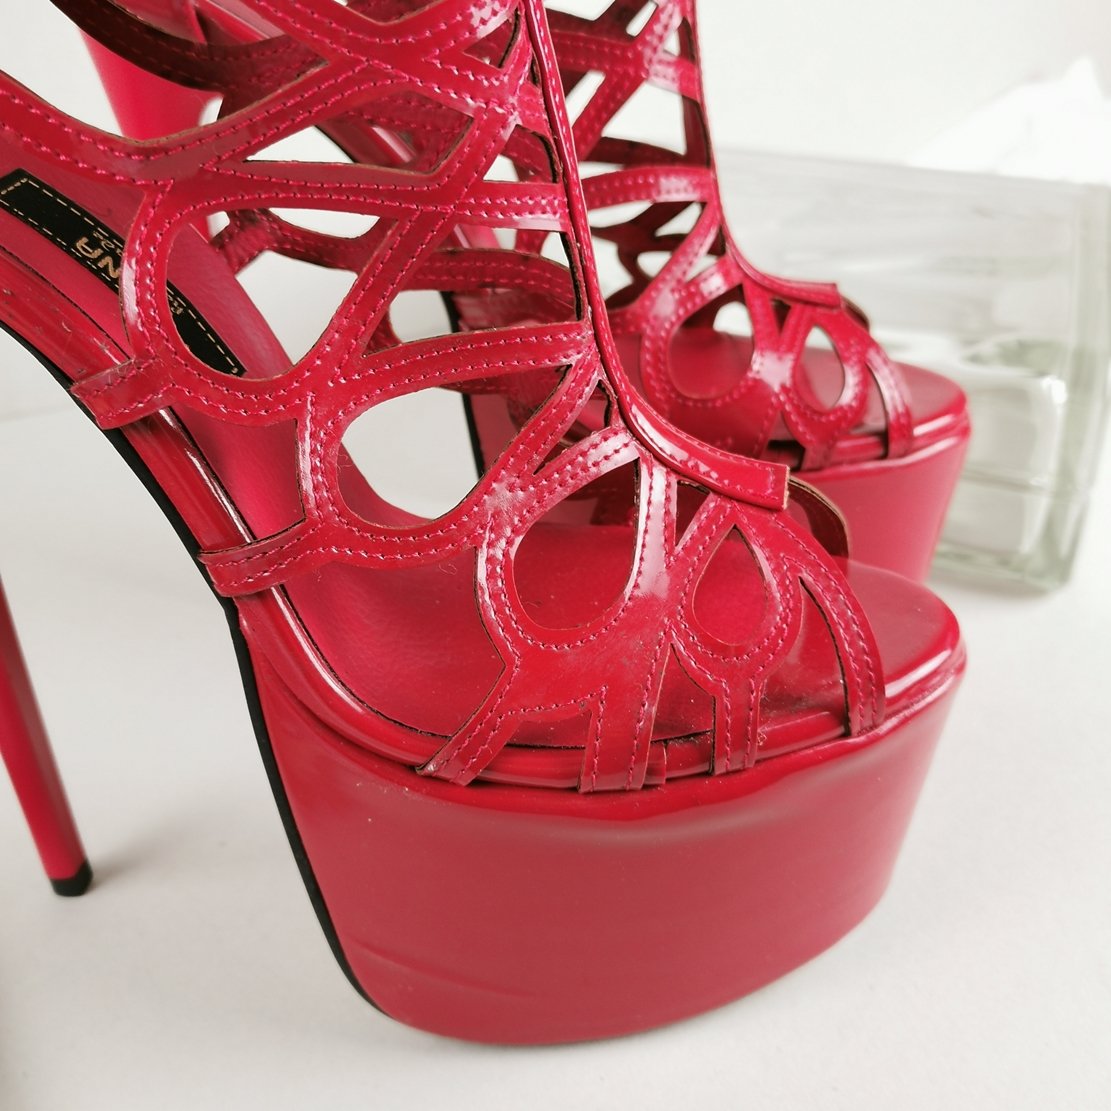 Red Patent Lazer Cage Ankle Heels - Tajna Club